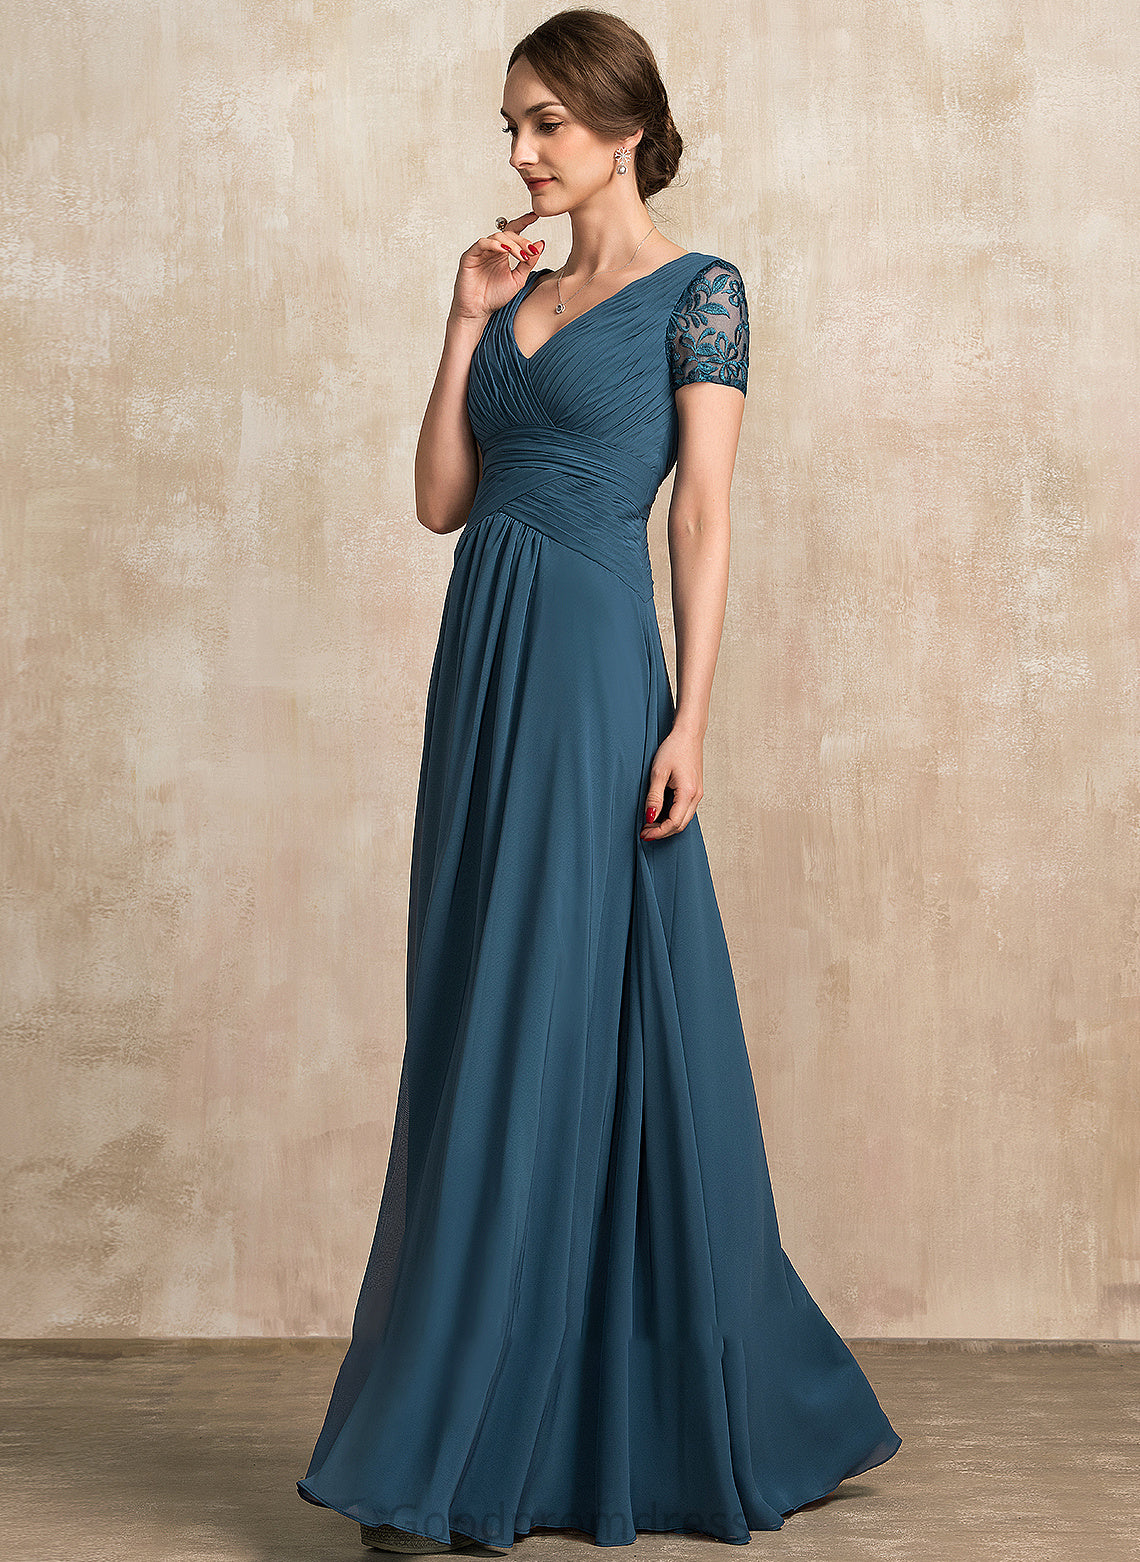 A-Line V-neck Lace Mother of With Mother of the Bride Dresses Dress Chiffon the Vivien Bride Floor-Length